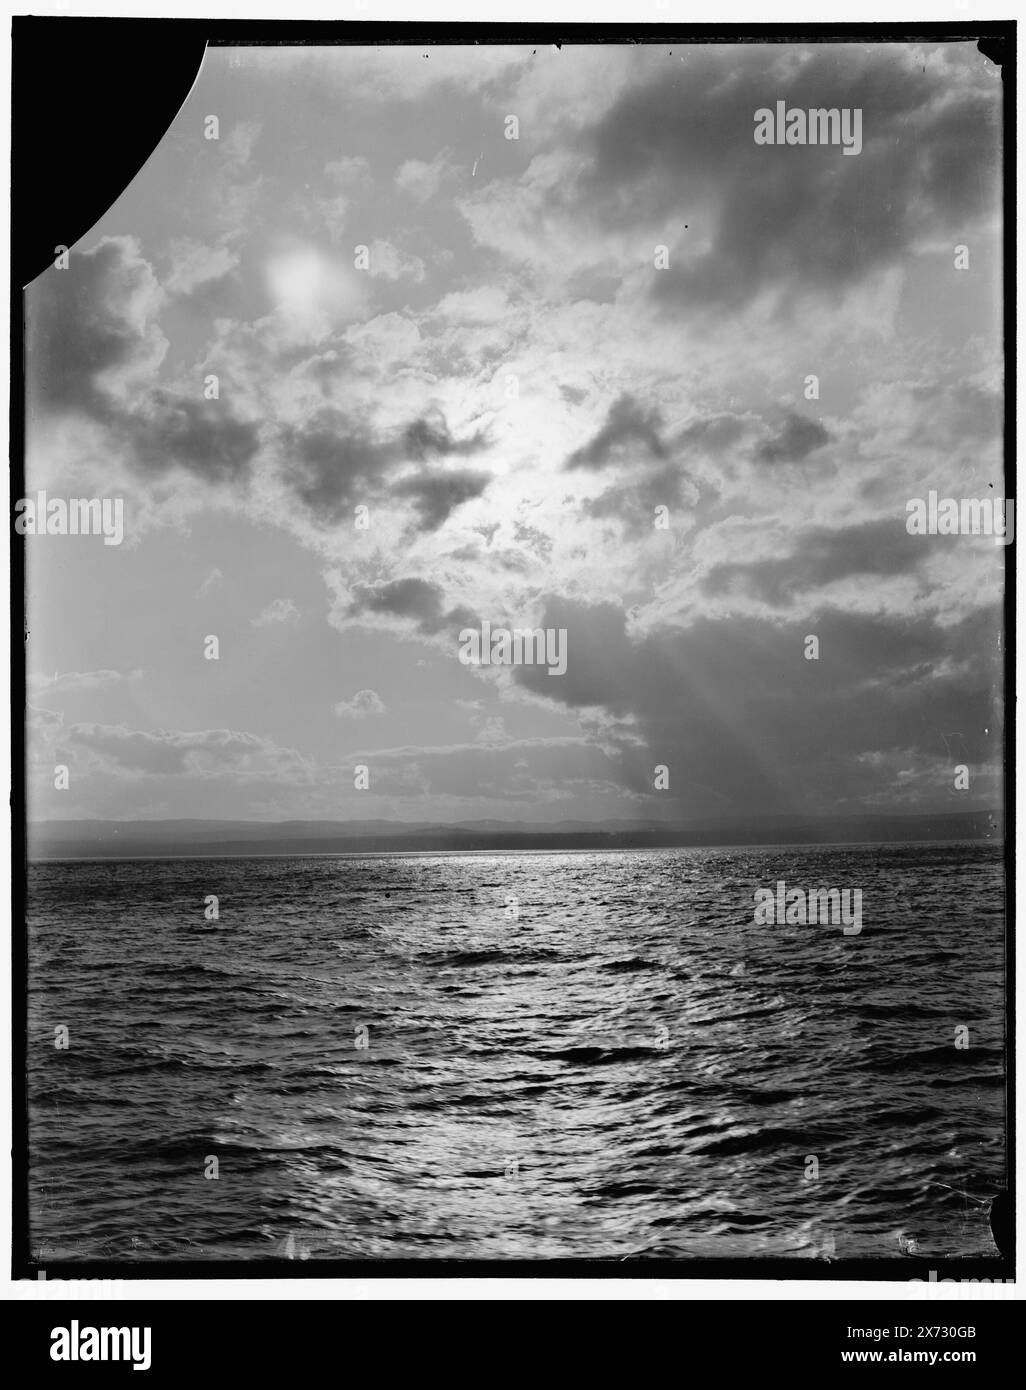 Sunset over Water, negative Risse unten rechts., 'G 3282' auf negative. No Detroit Publishing Co. No., Gift; State Historical Society of Colorado; 1949, Sunrise & Sunsets. Stockfoto